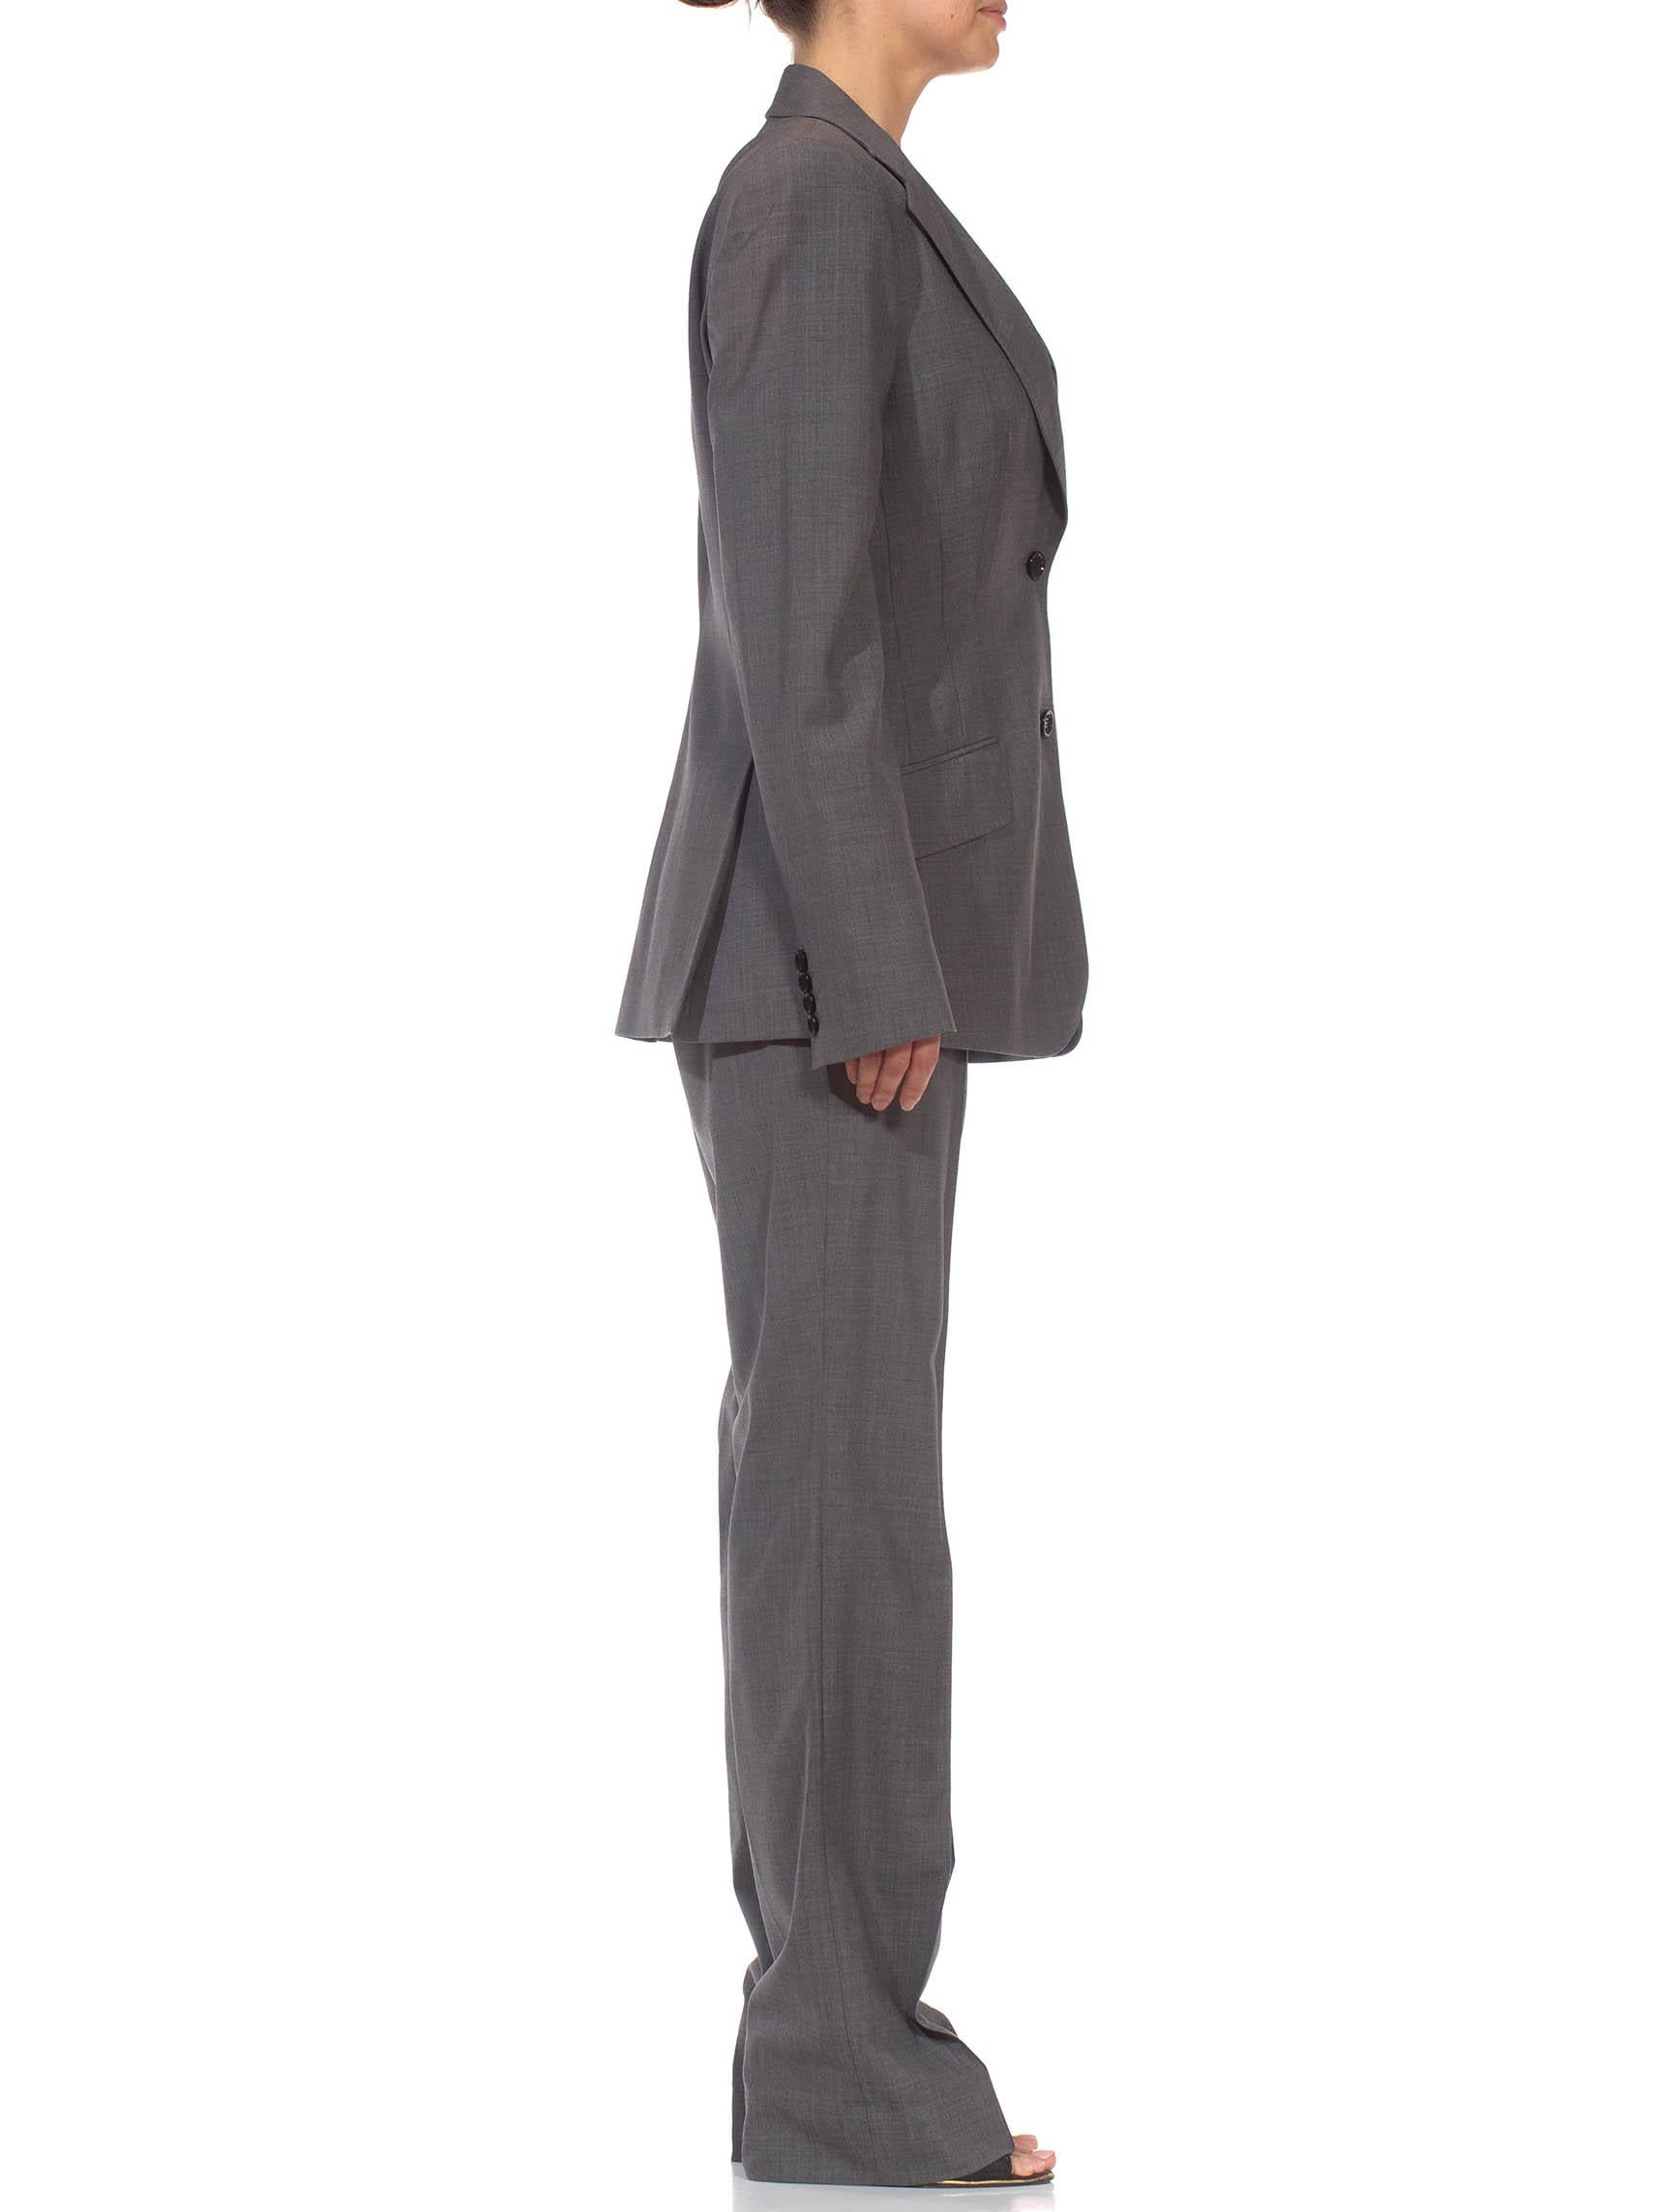 Gray 1990S DOLCE & GABBANA Grey Wool Blend Single Breasted Pant Suit For Sale